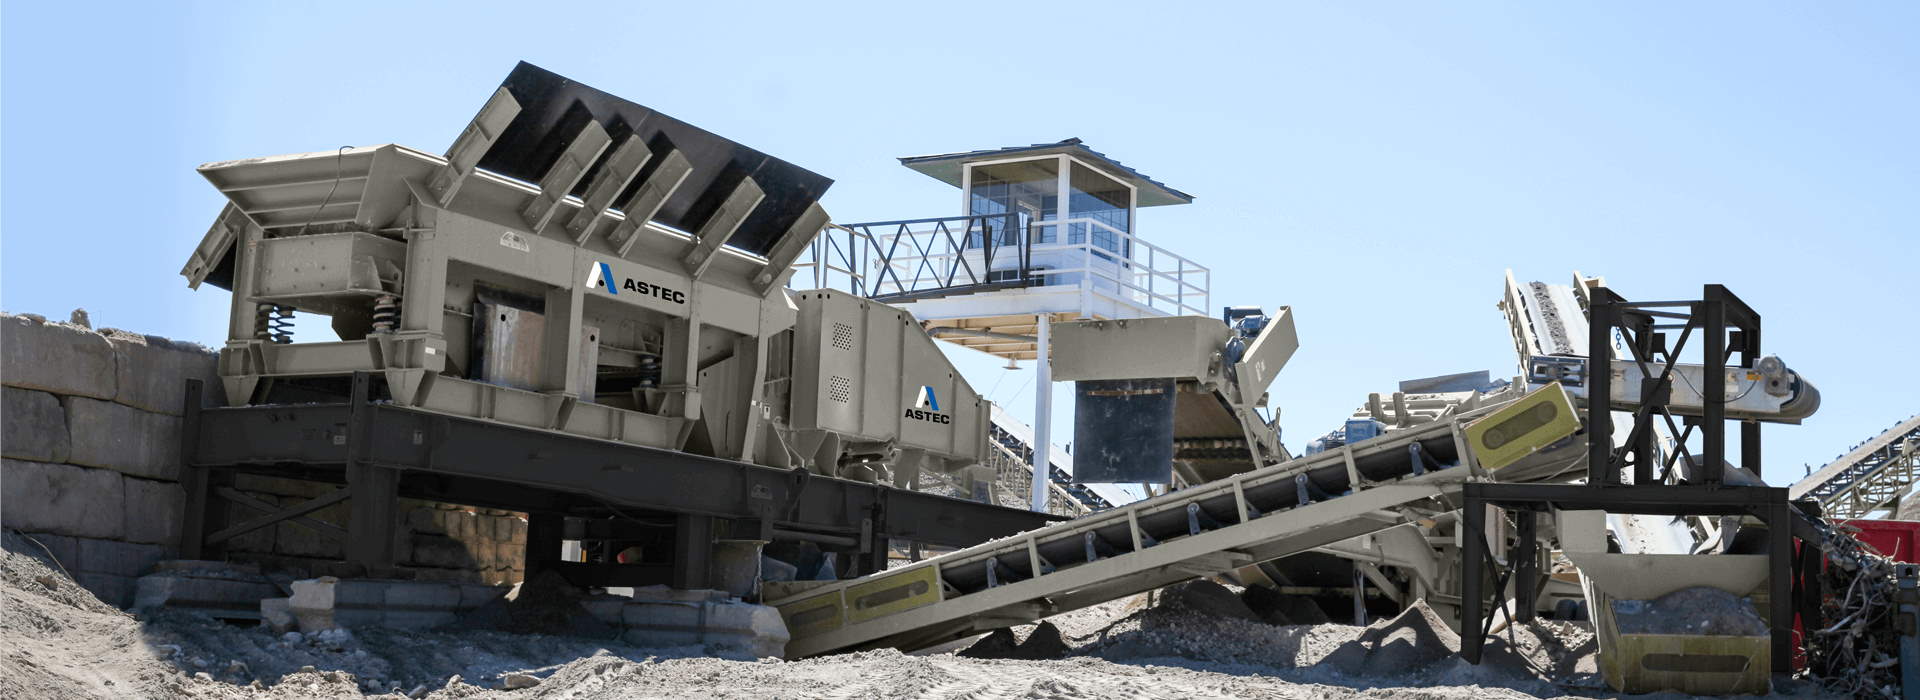 Pioneer® jaw crusher in concrete recycling application